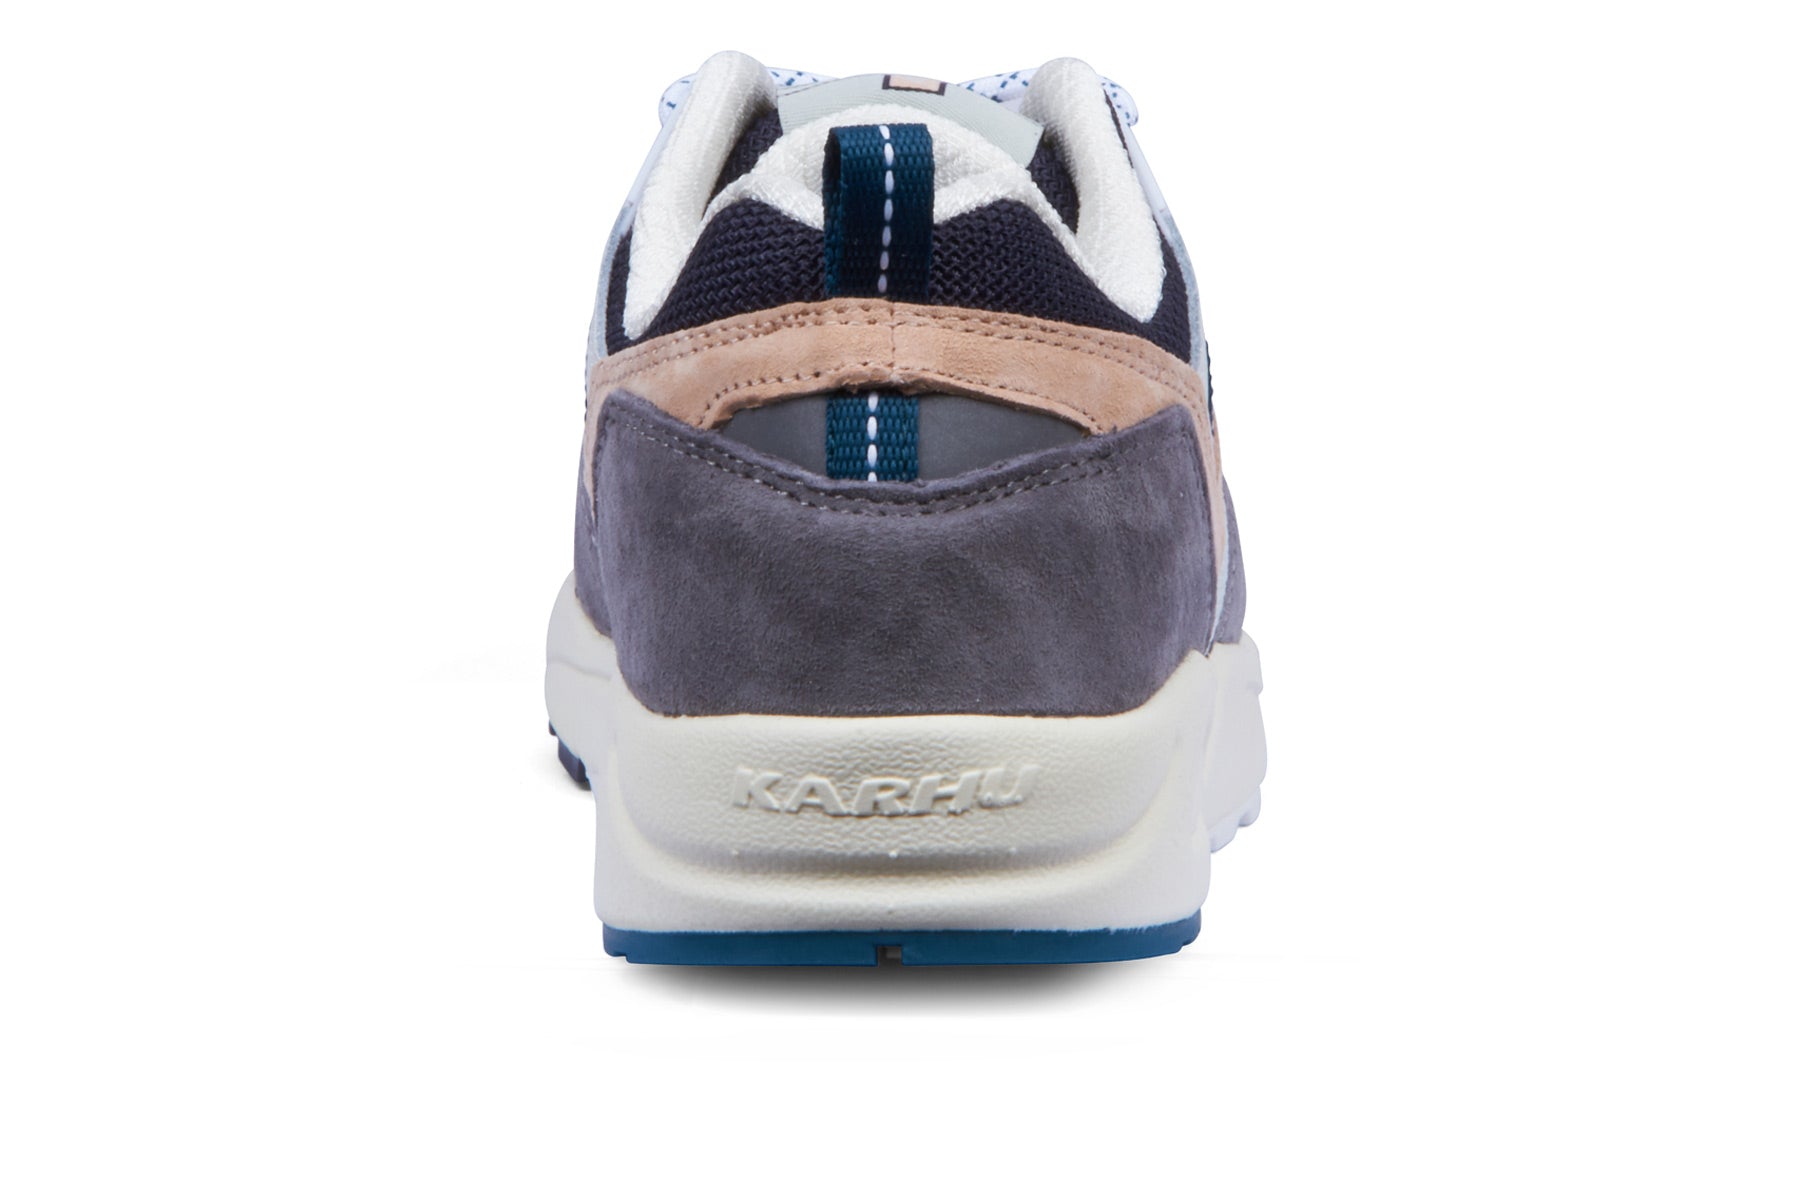 Karhu Fusion 2.0 - Frost Gray/Blue Coral